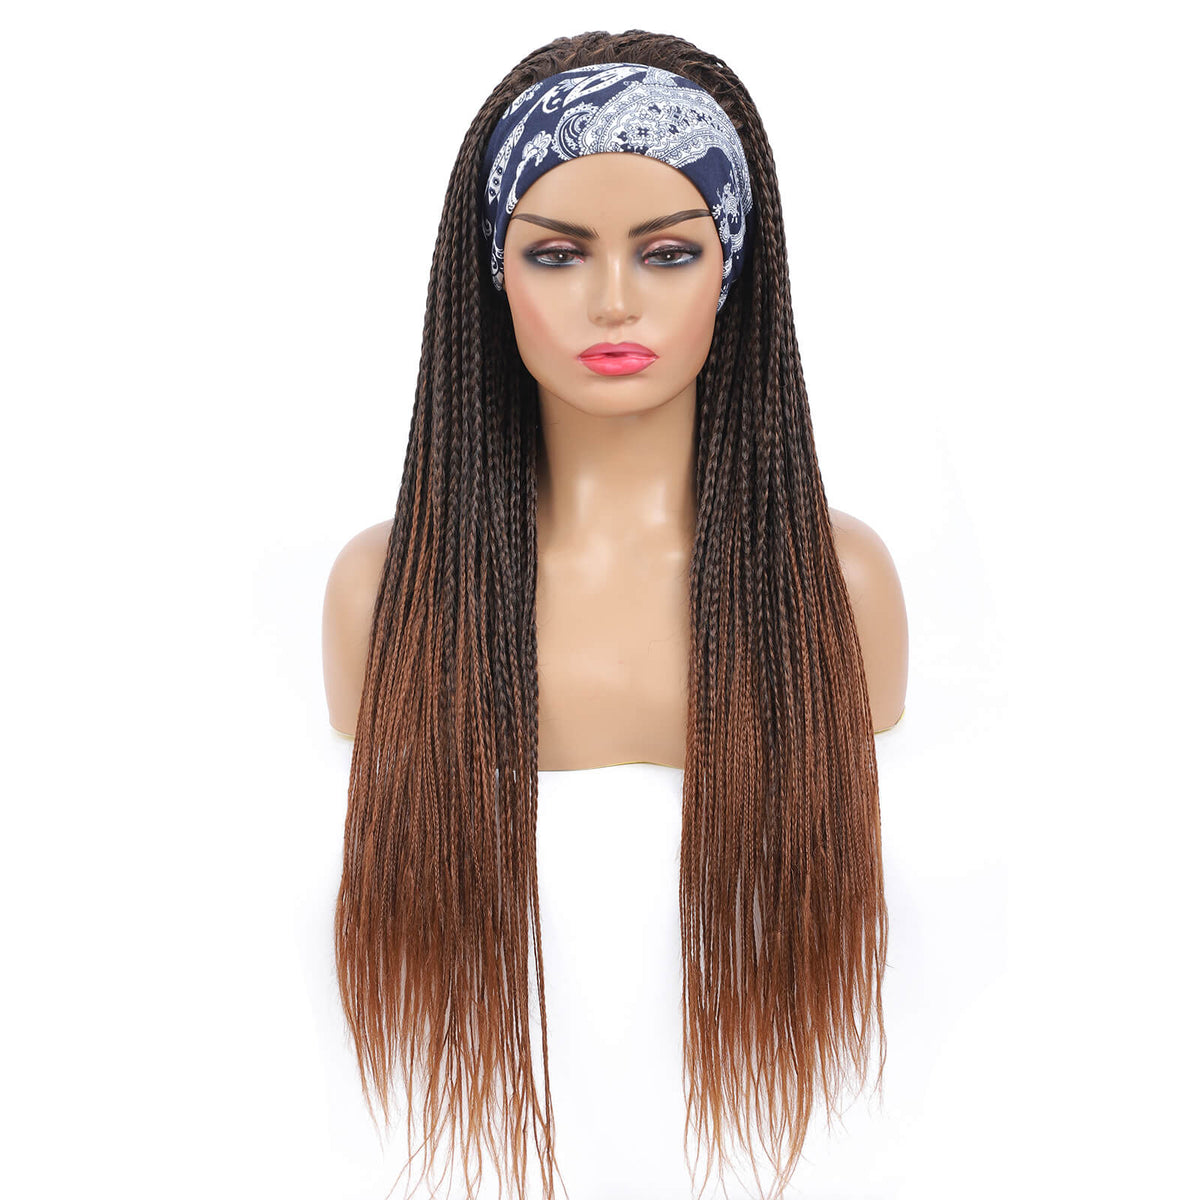 Headband Wigs Box Braided Wigs For Black Women Color Brown Pre Styled